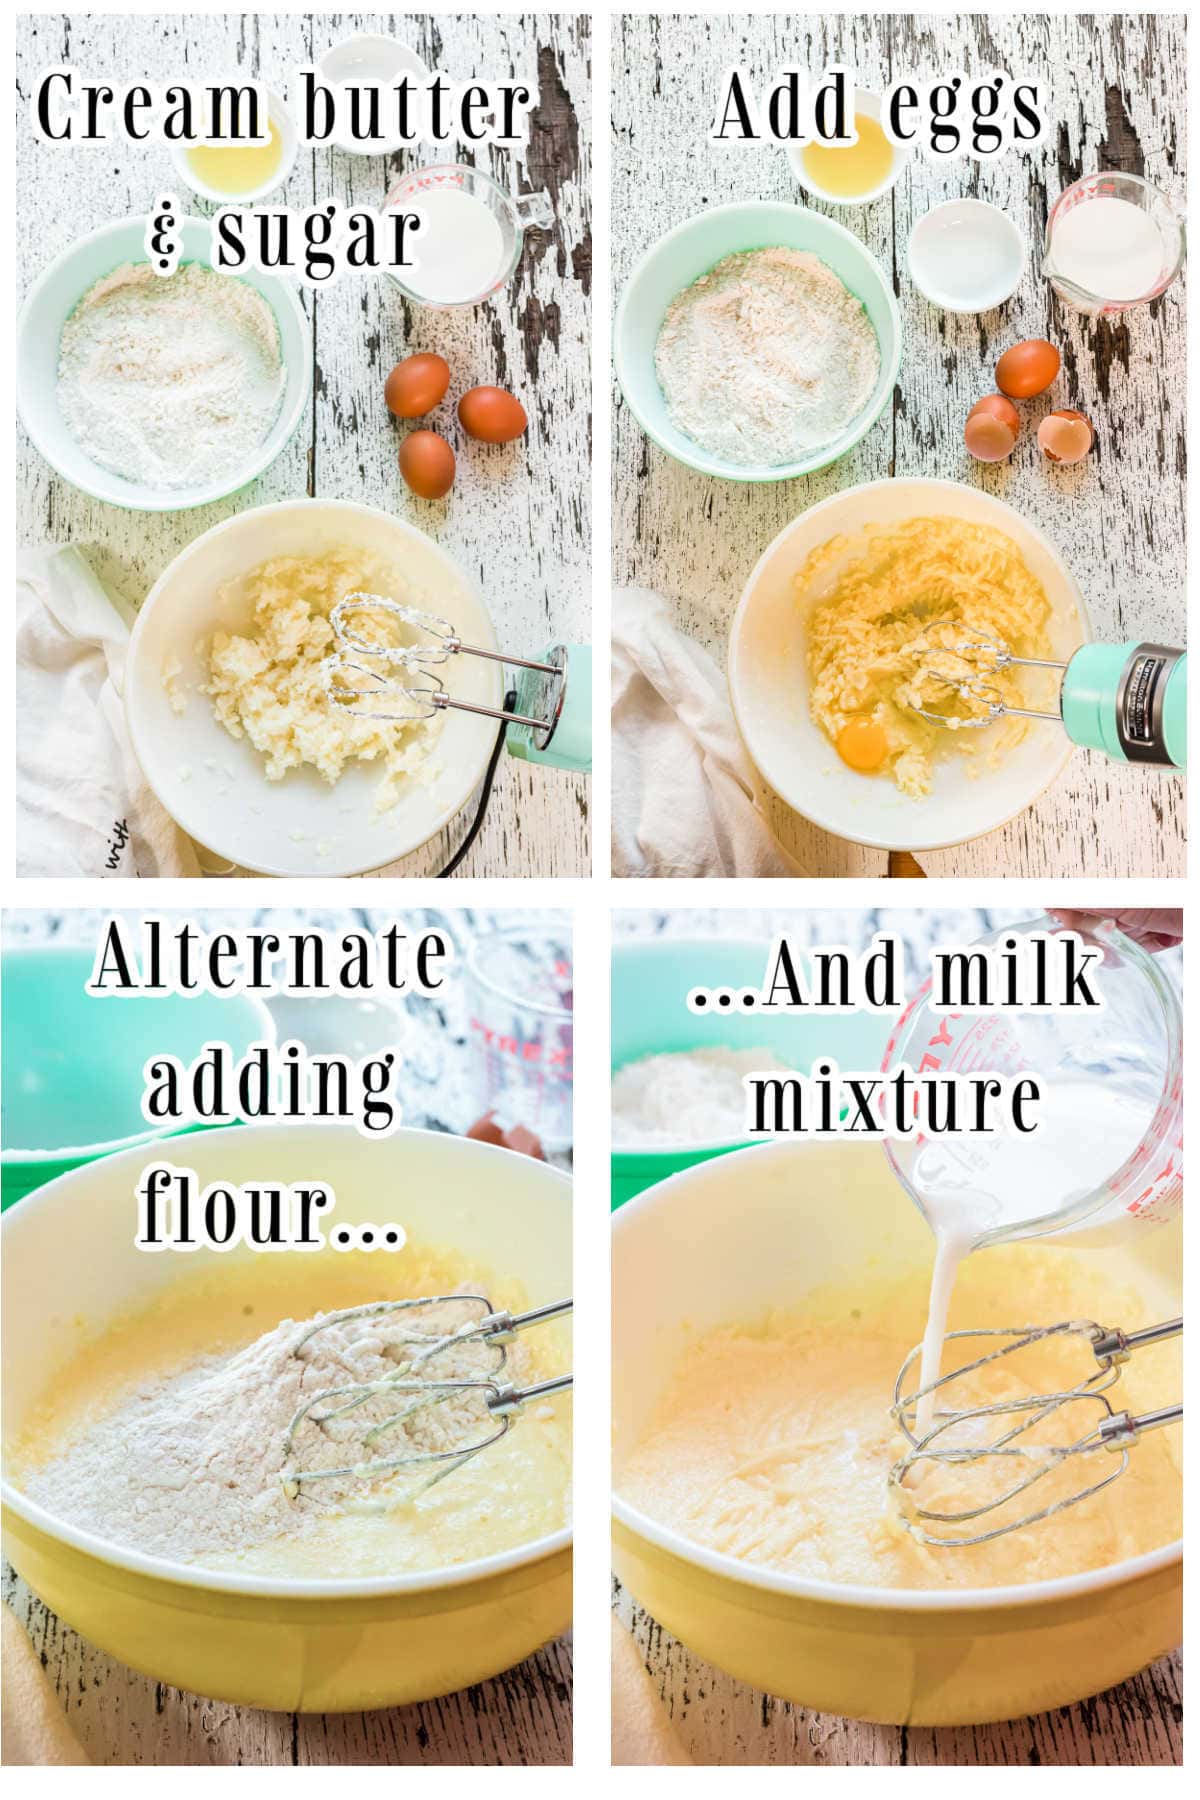 Step by step images for making lemon cream cake.